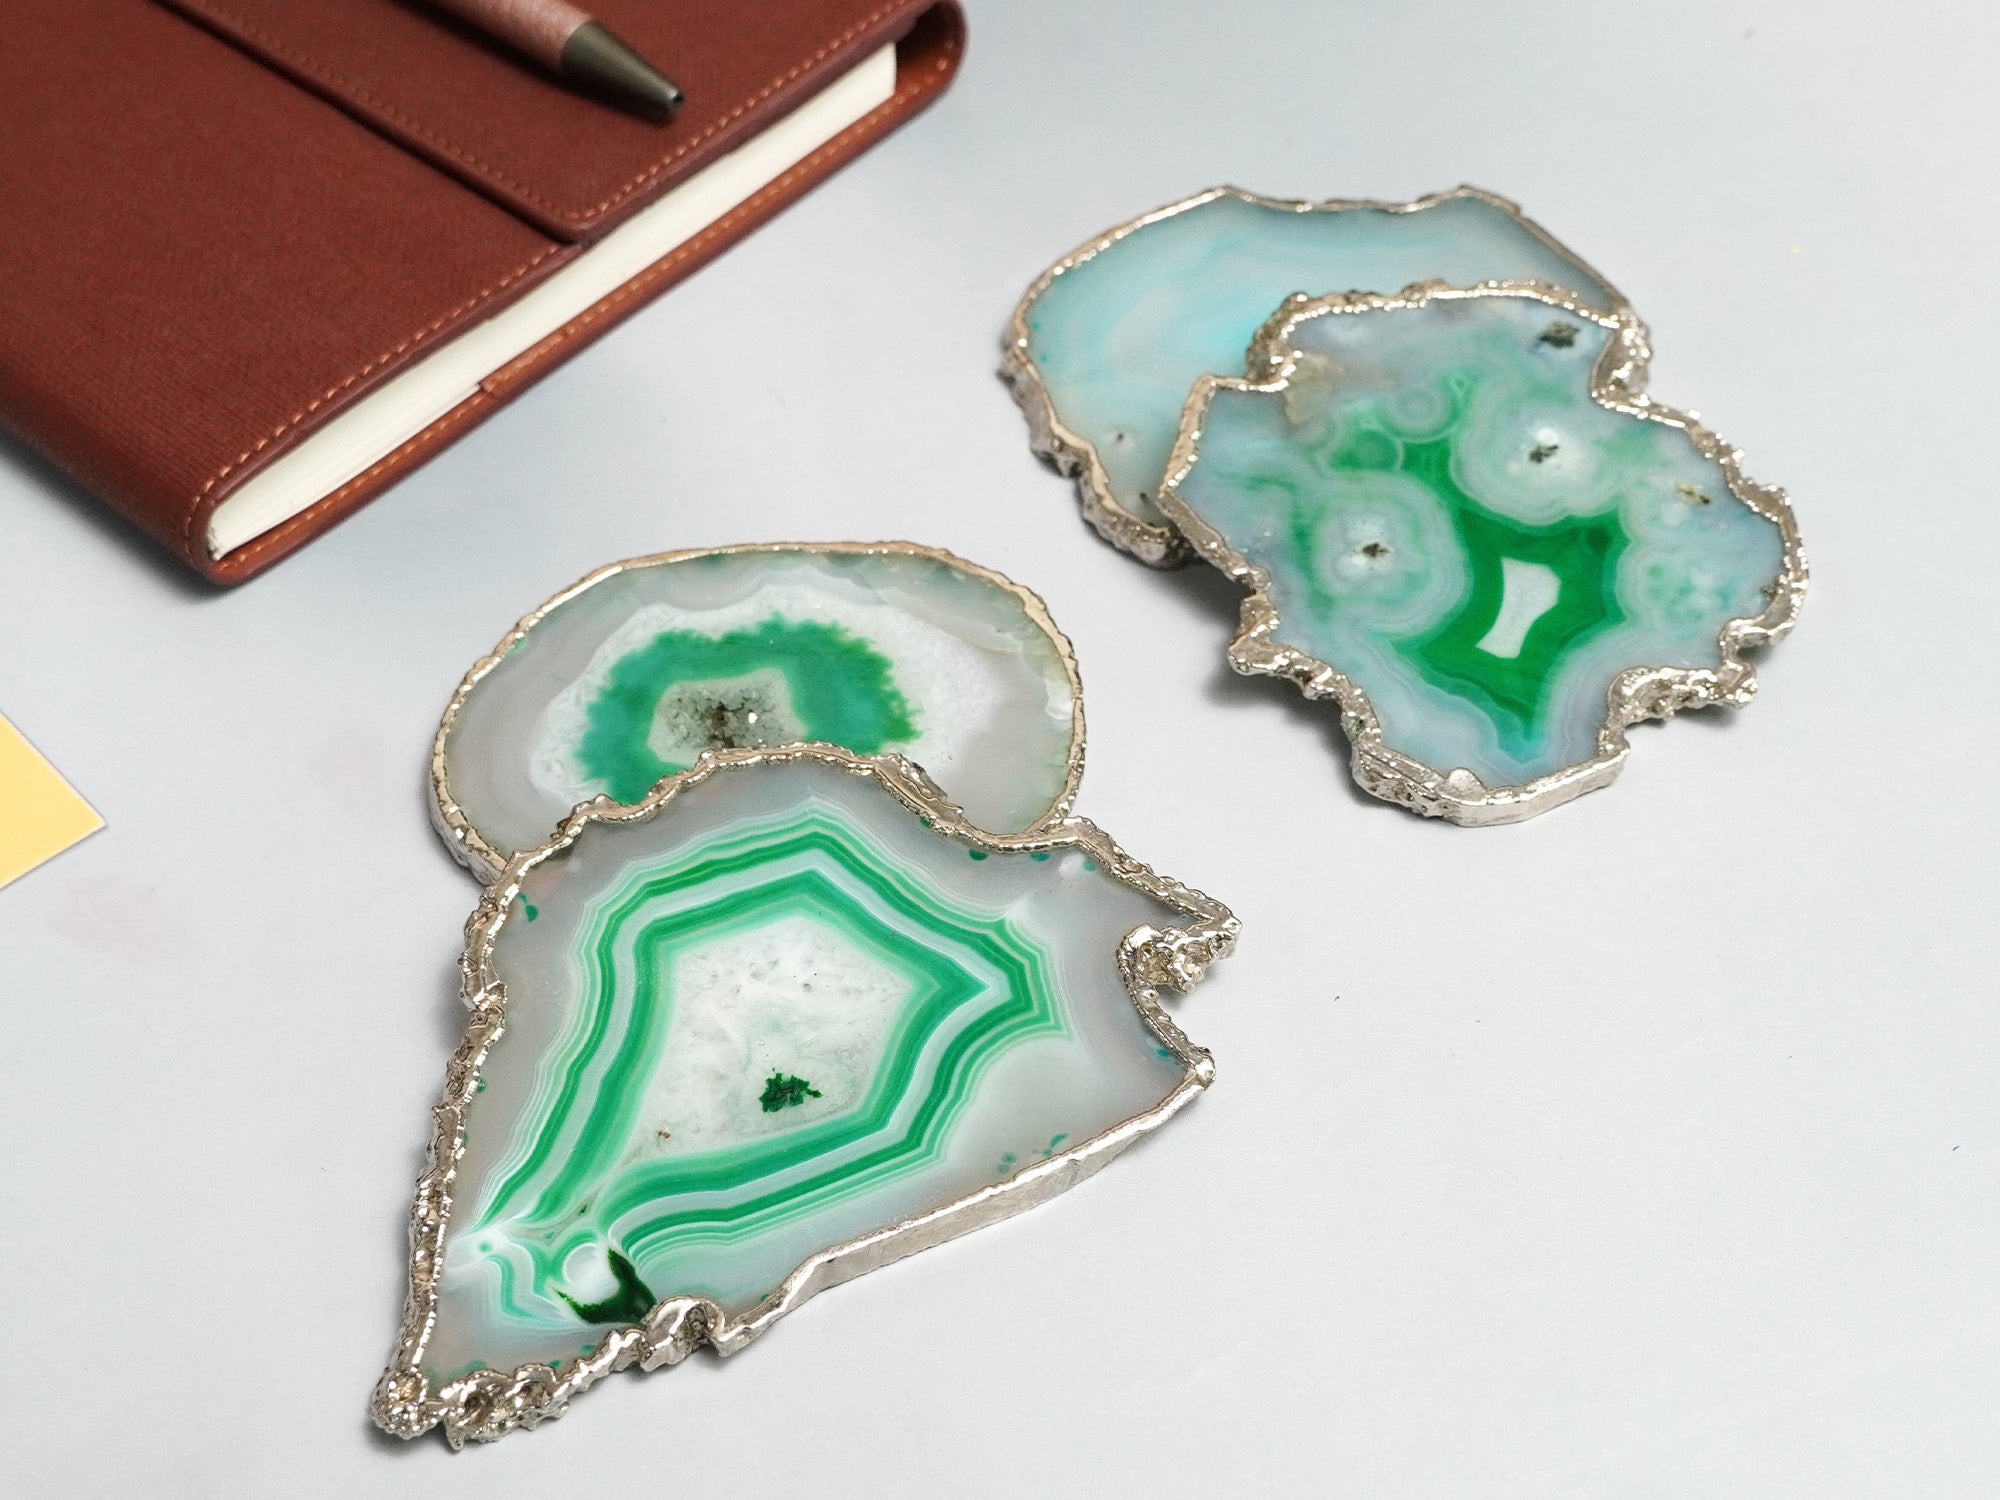 Dominica BIBELOT Agate Handcrafted Luxury Silver Plated Coaster (Natural, Splash Green)